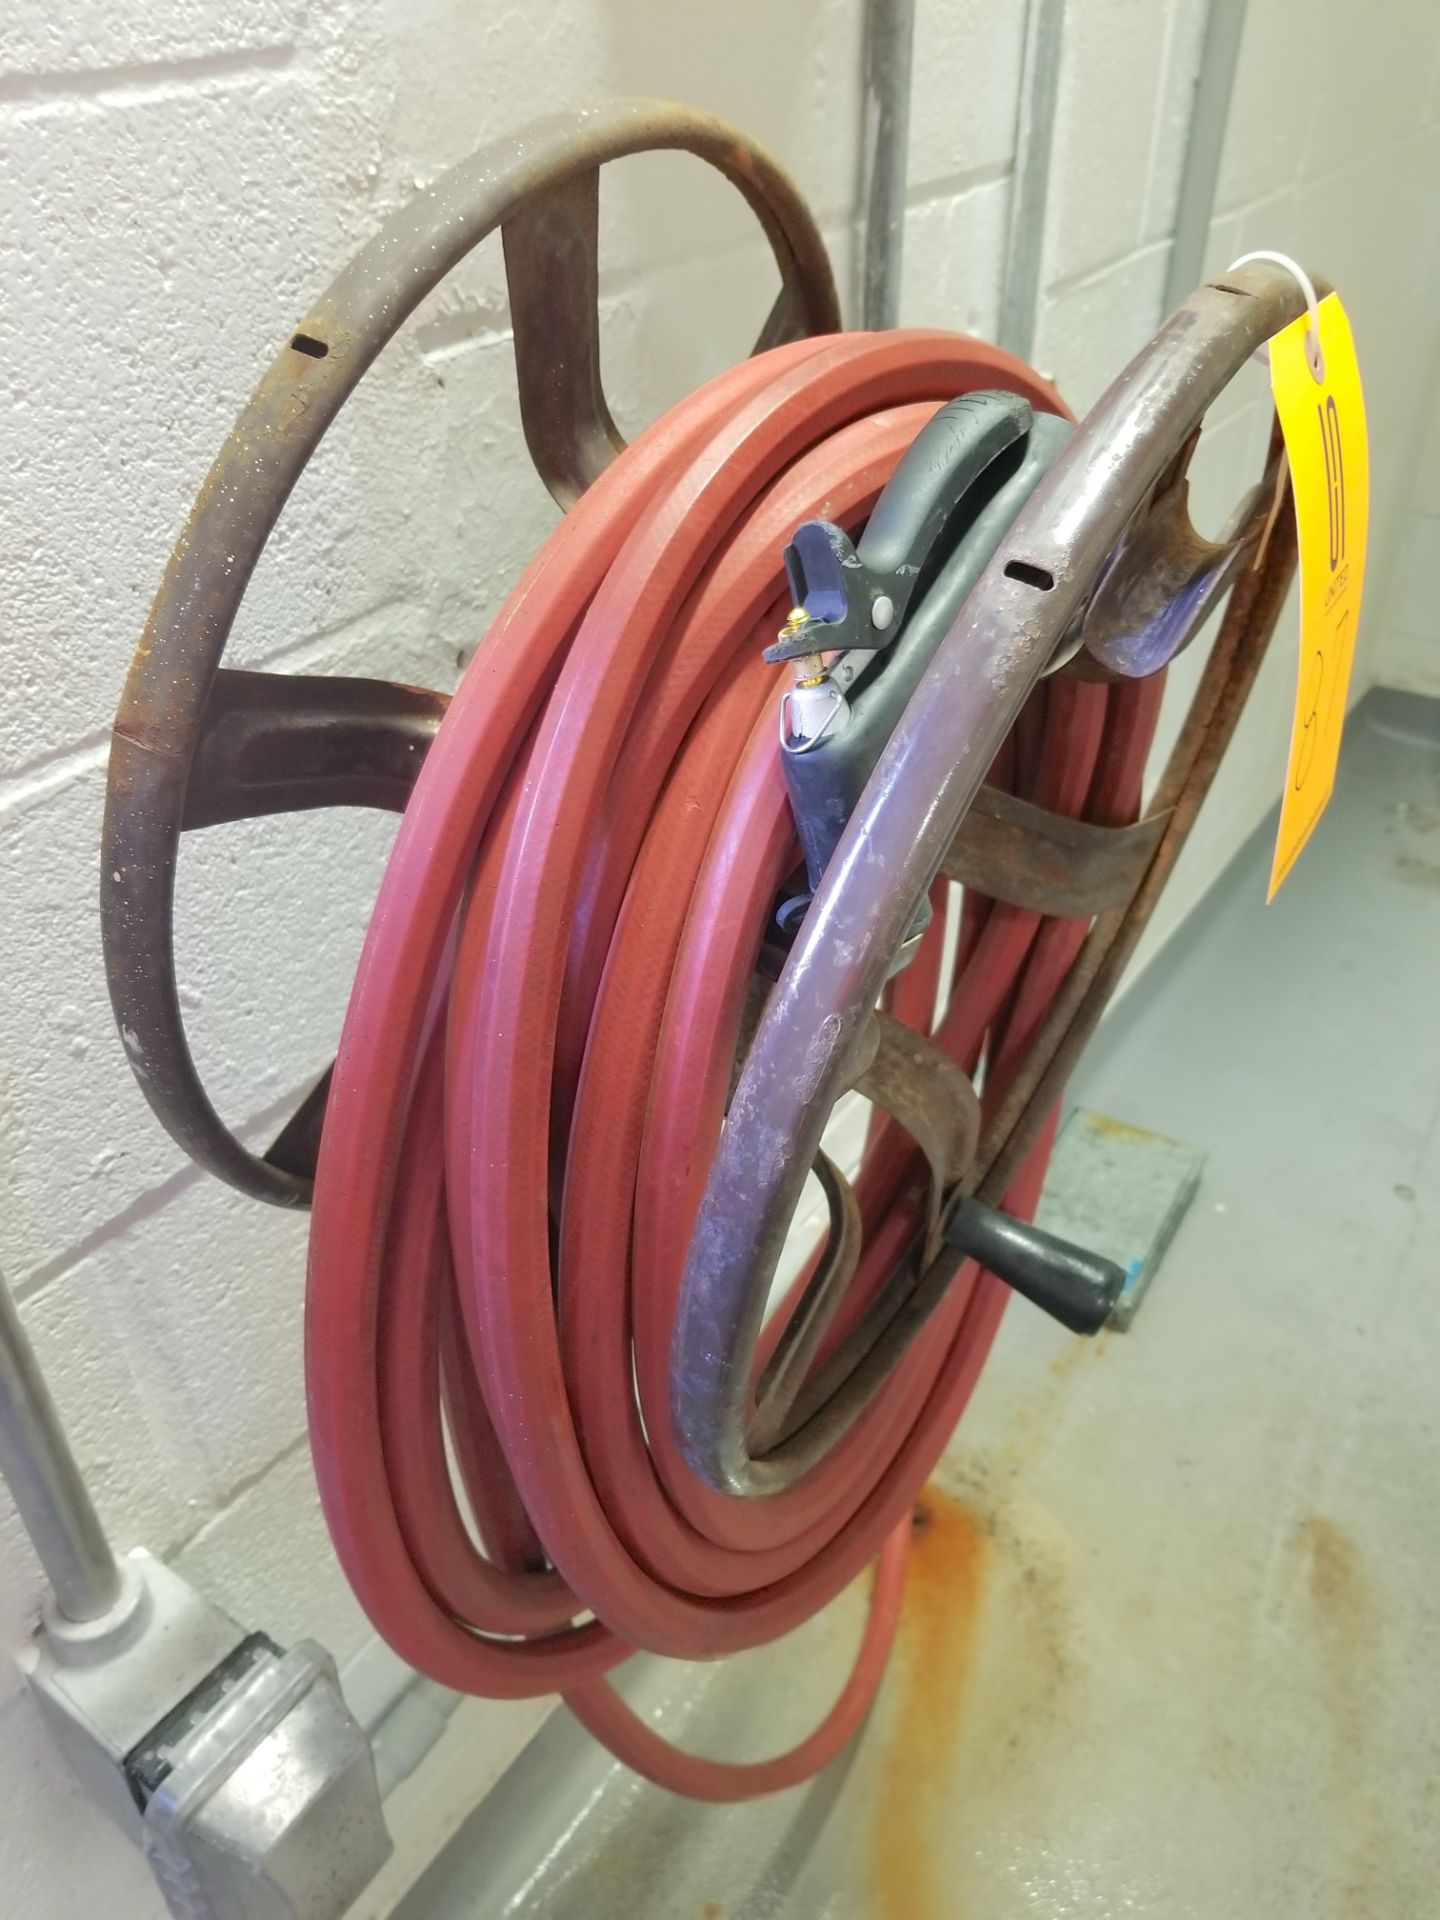 Hose Reel with Red Hose - Image 2 of 2